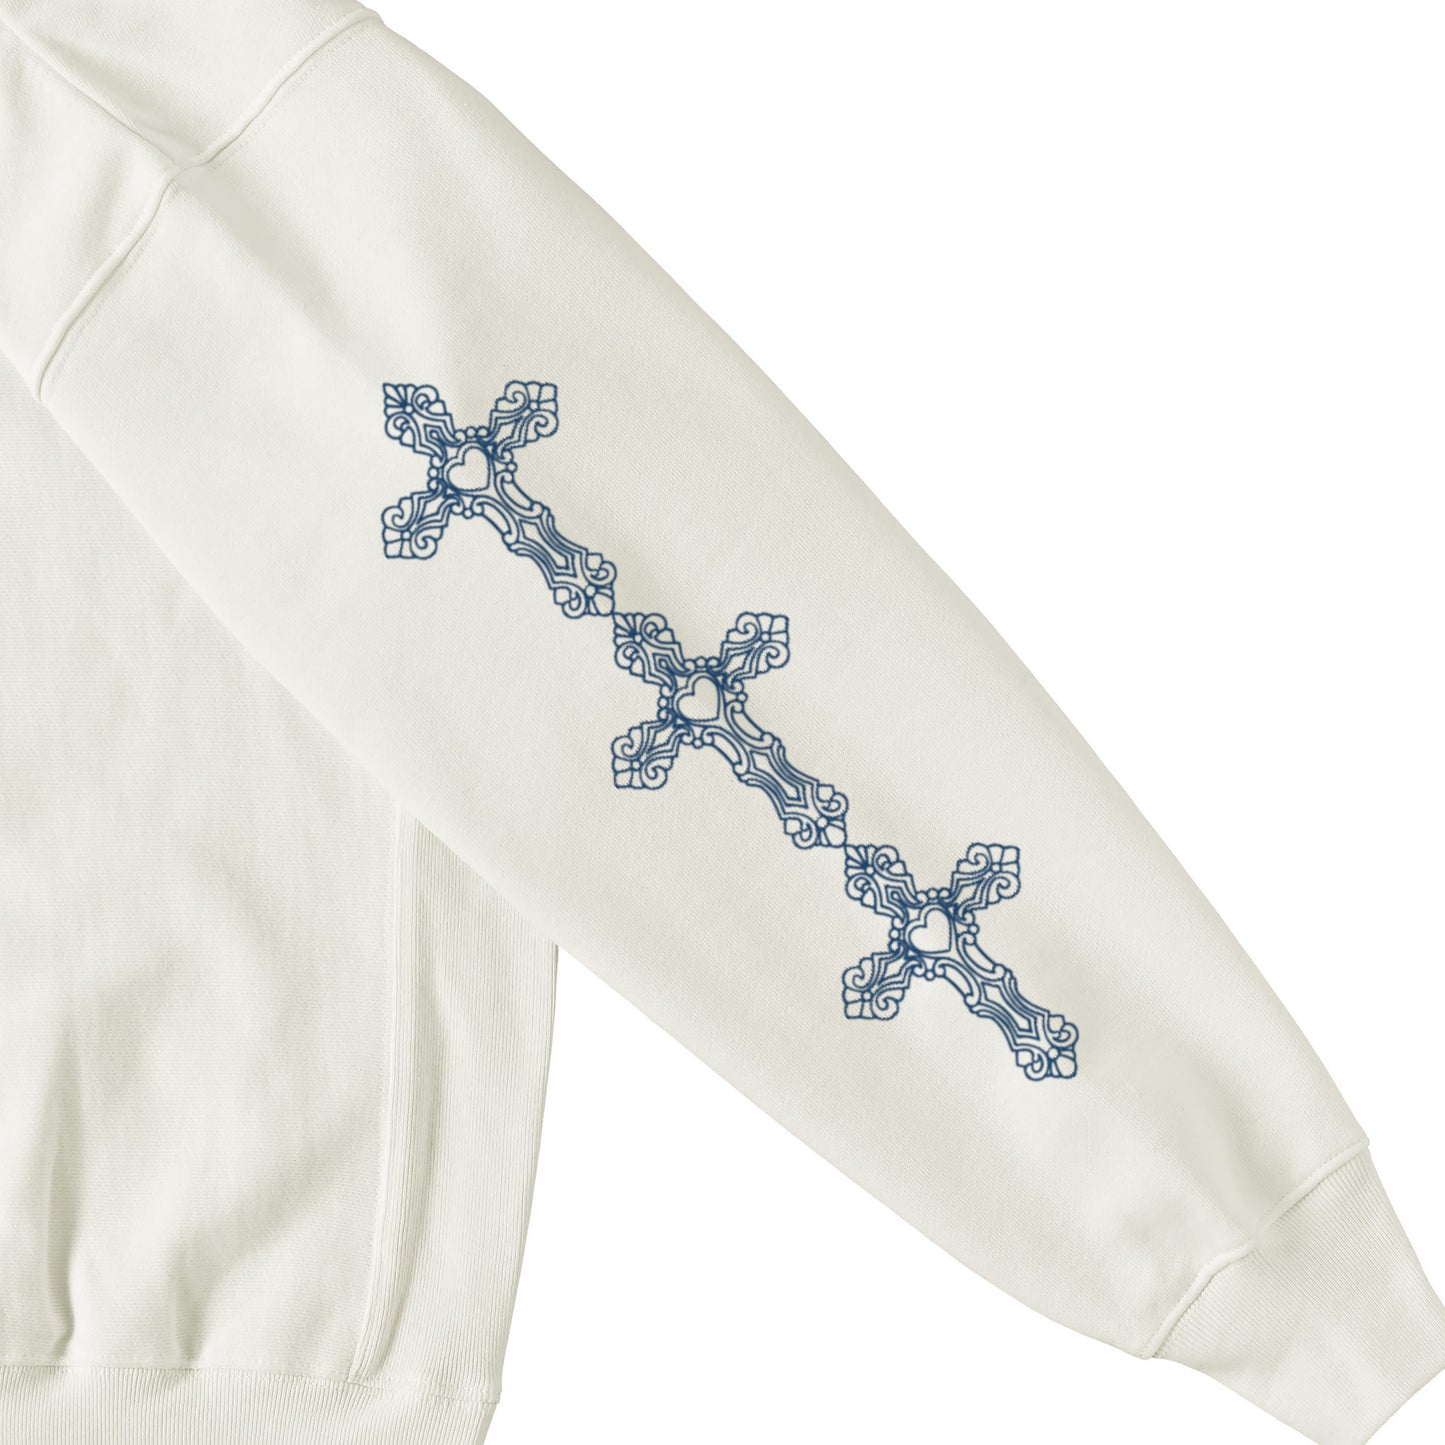 “Wings of blue flame and kitschy rosary pattern” W zip hoodie 